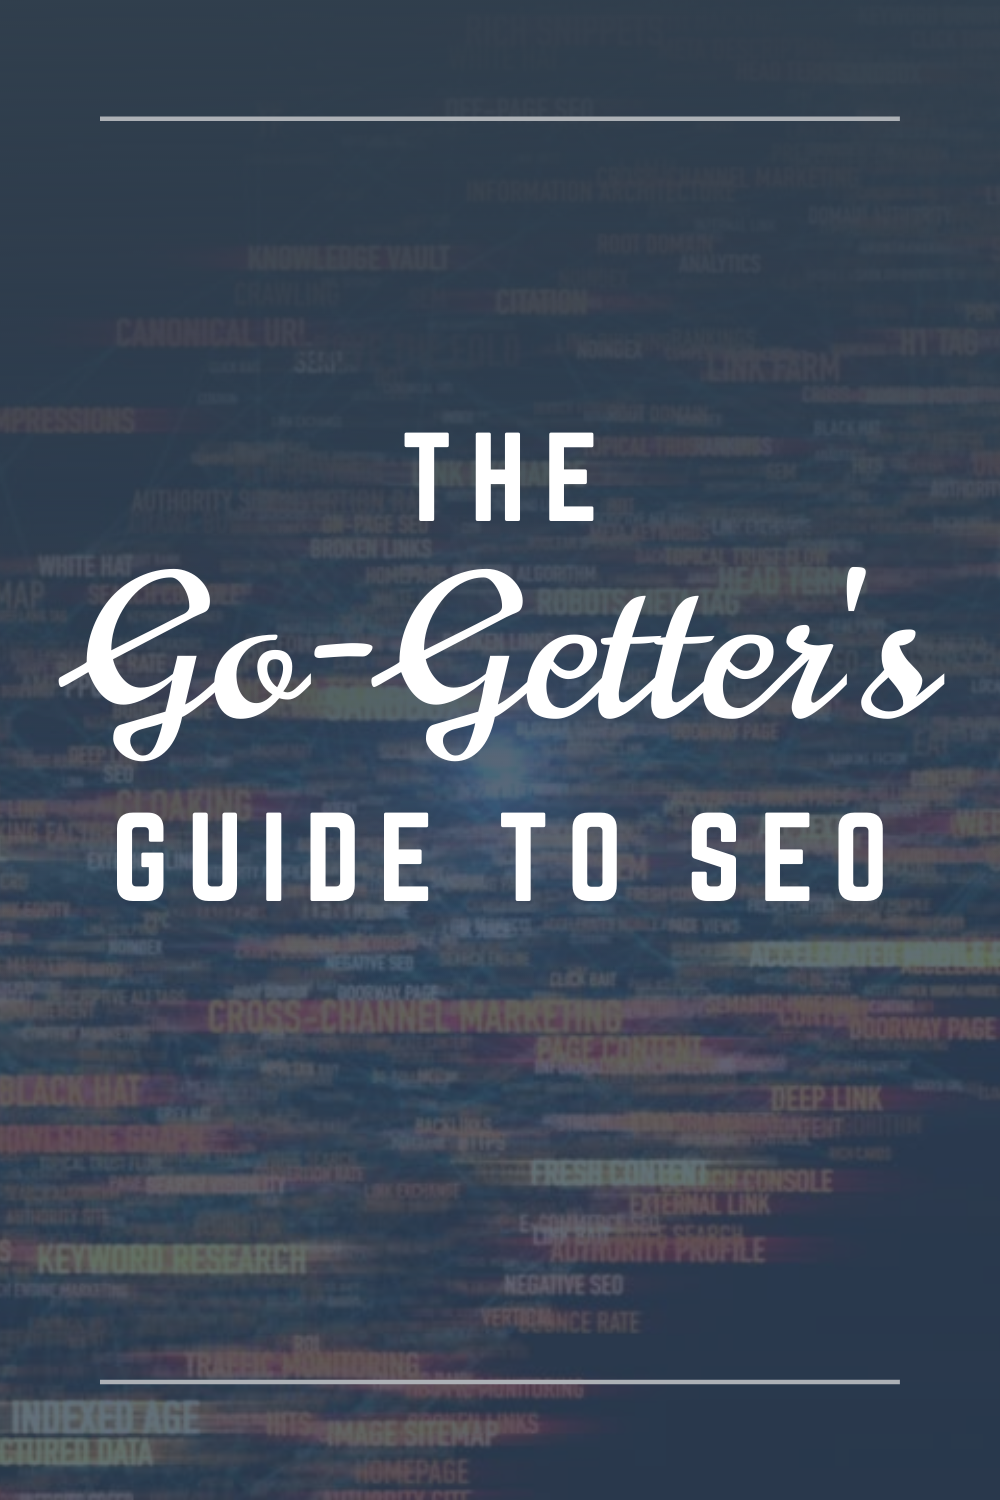 The go-getter's guide to SEO by WebWiskee